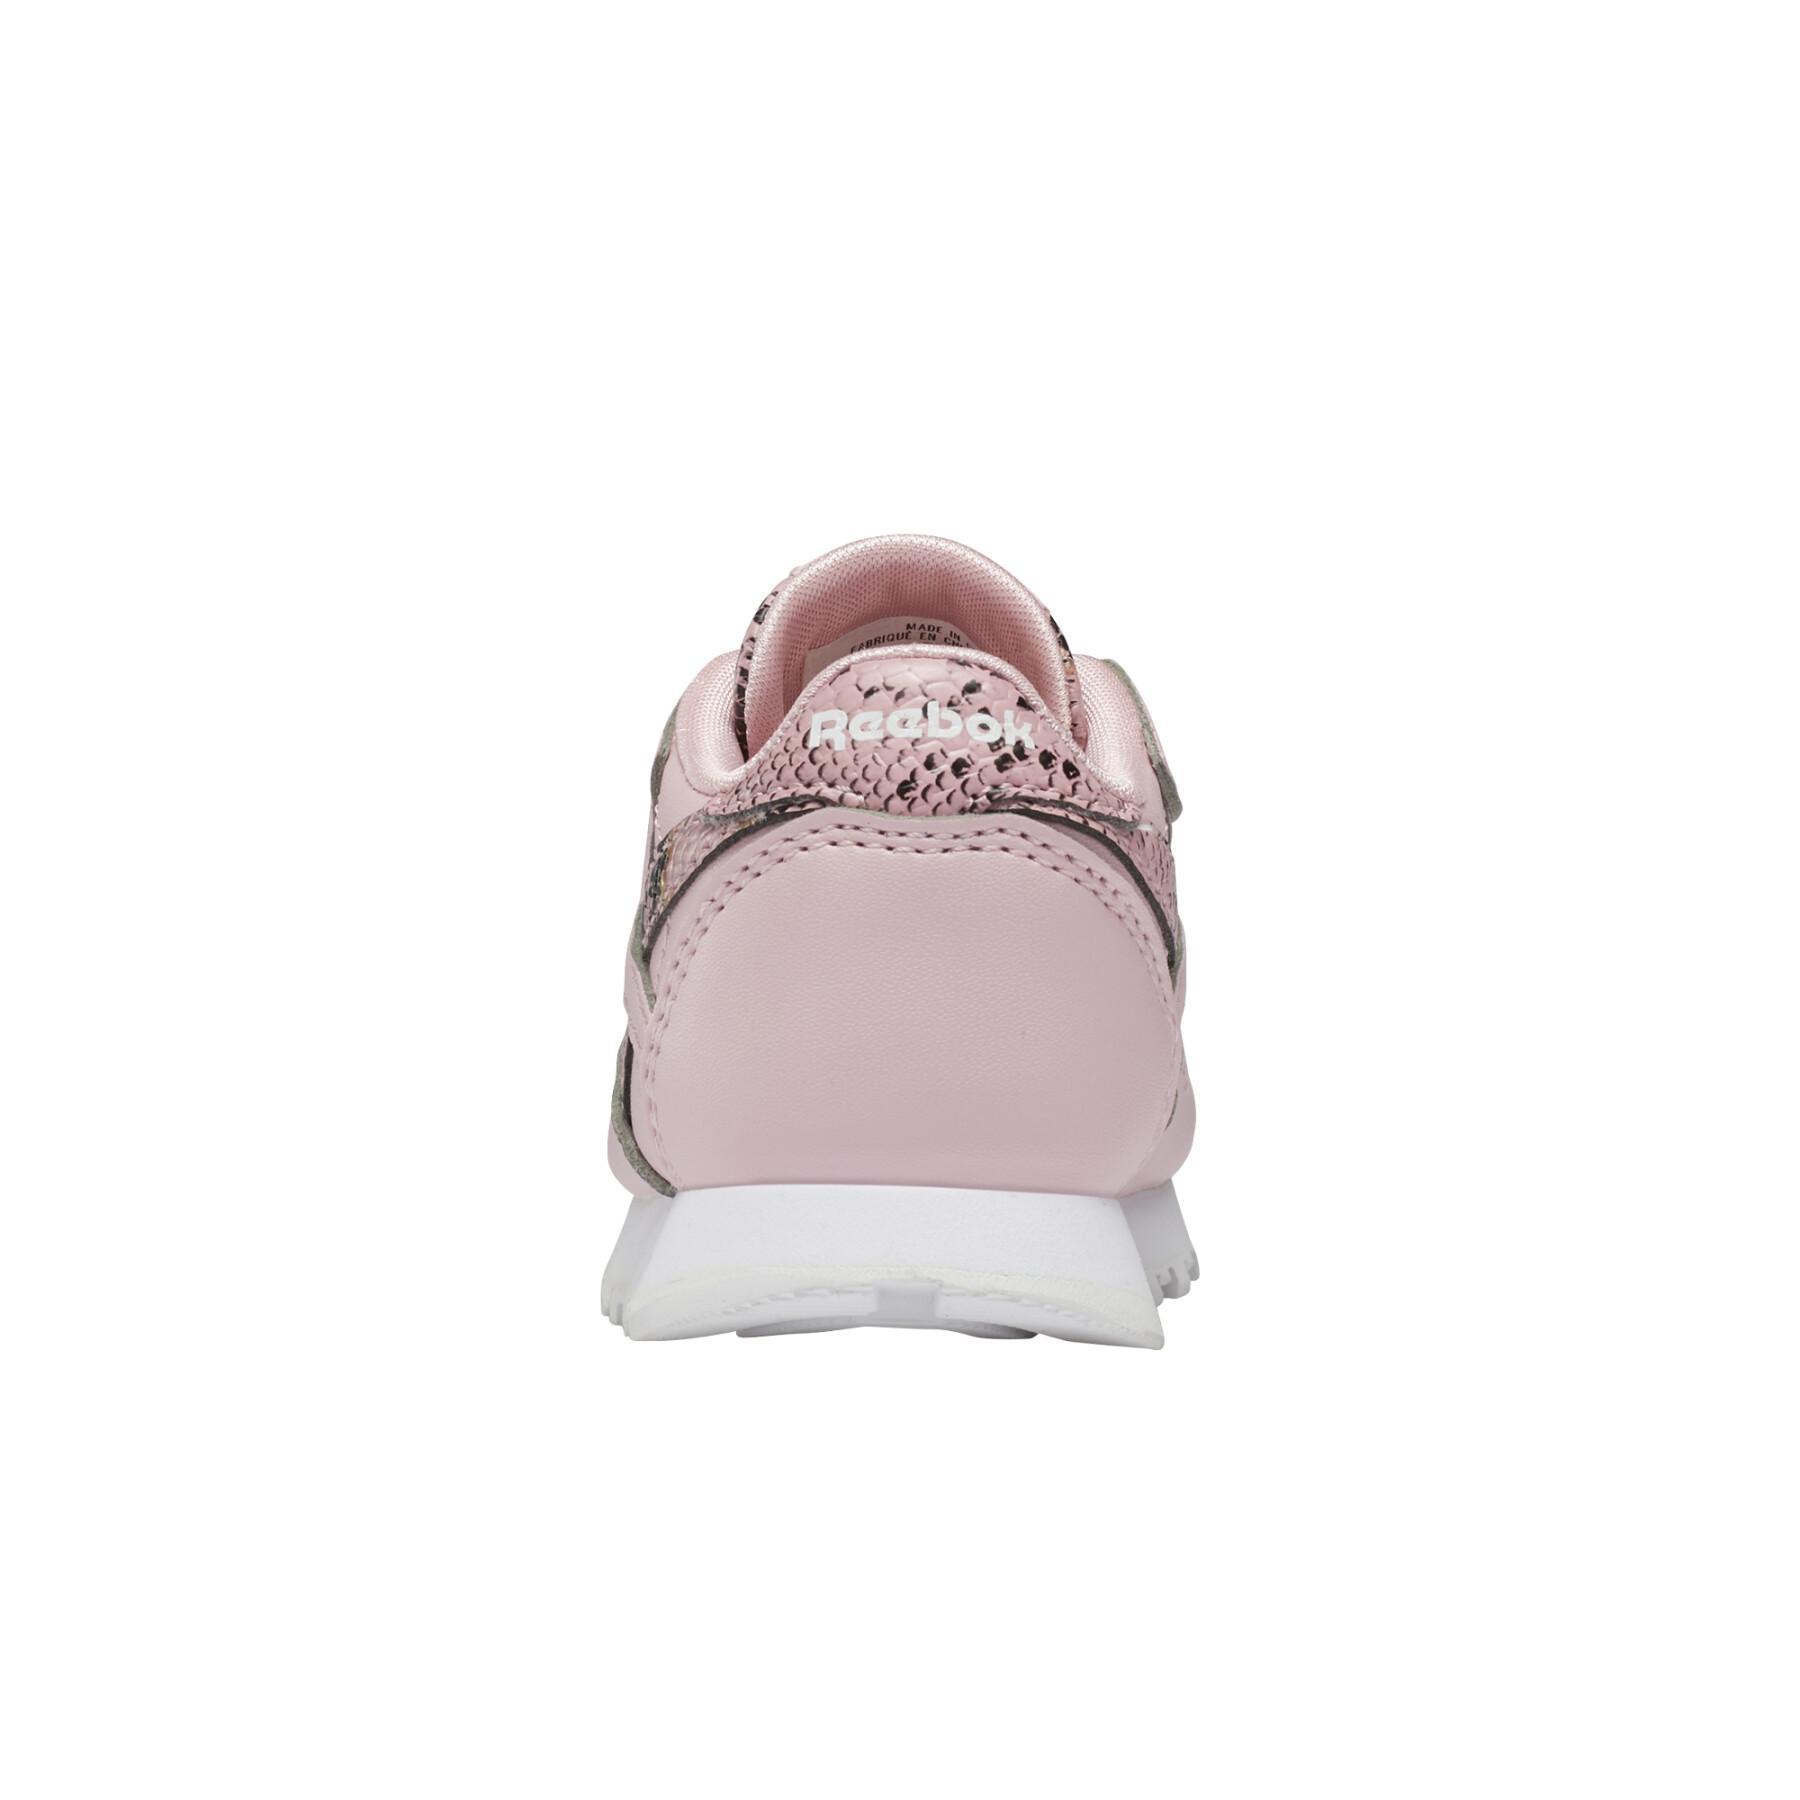 Baby shoes Reebok Leather